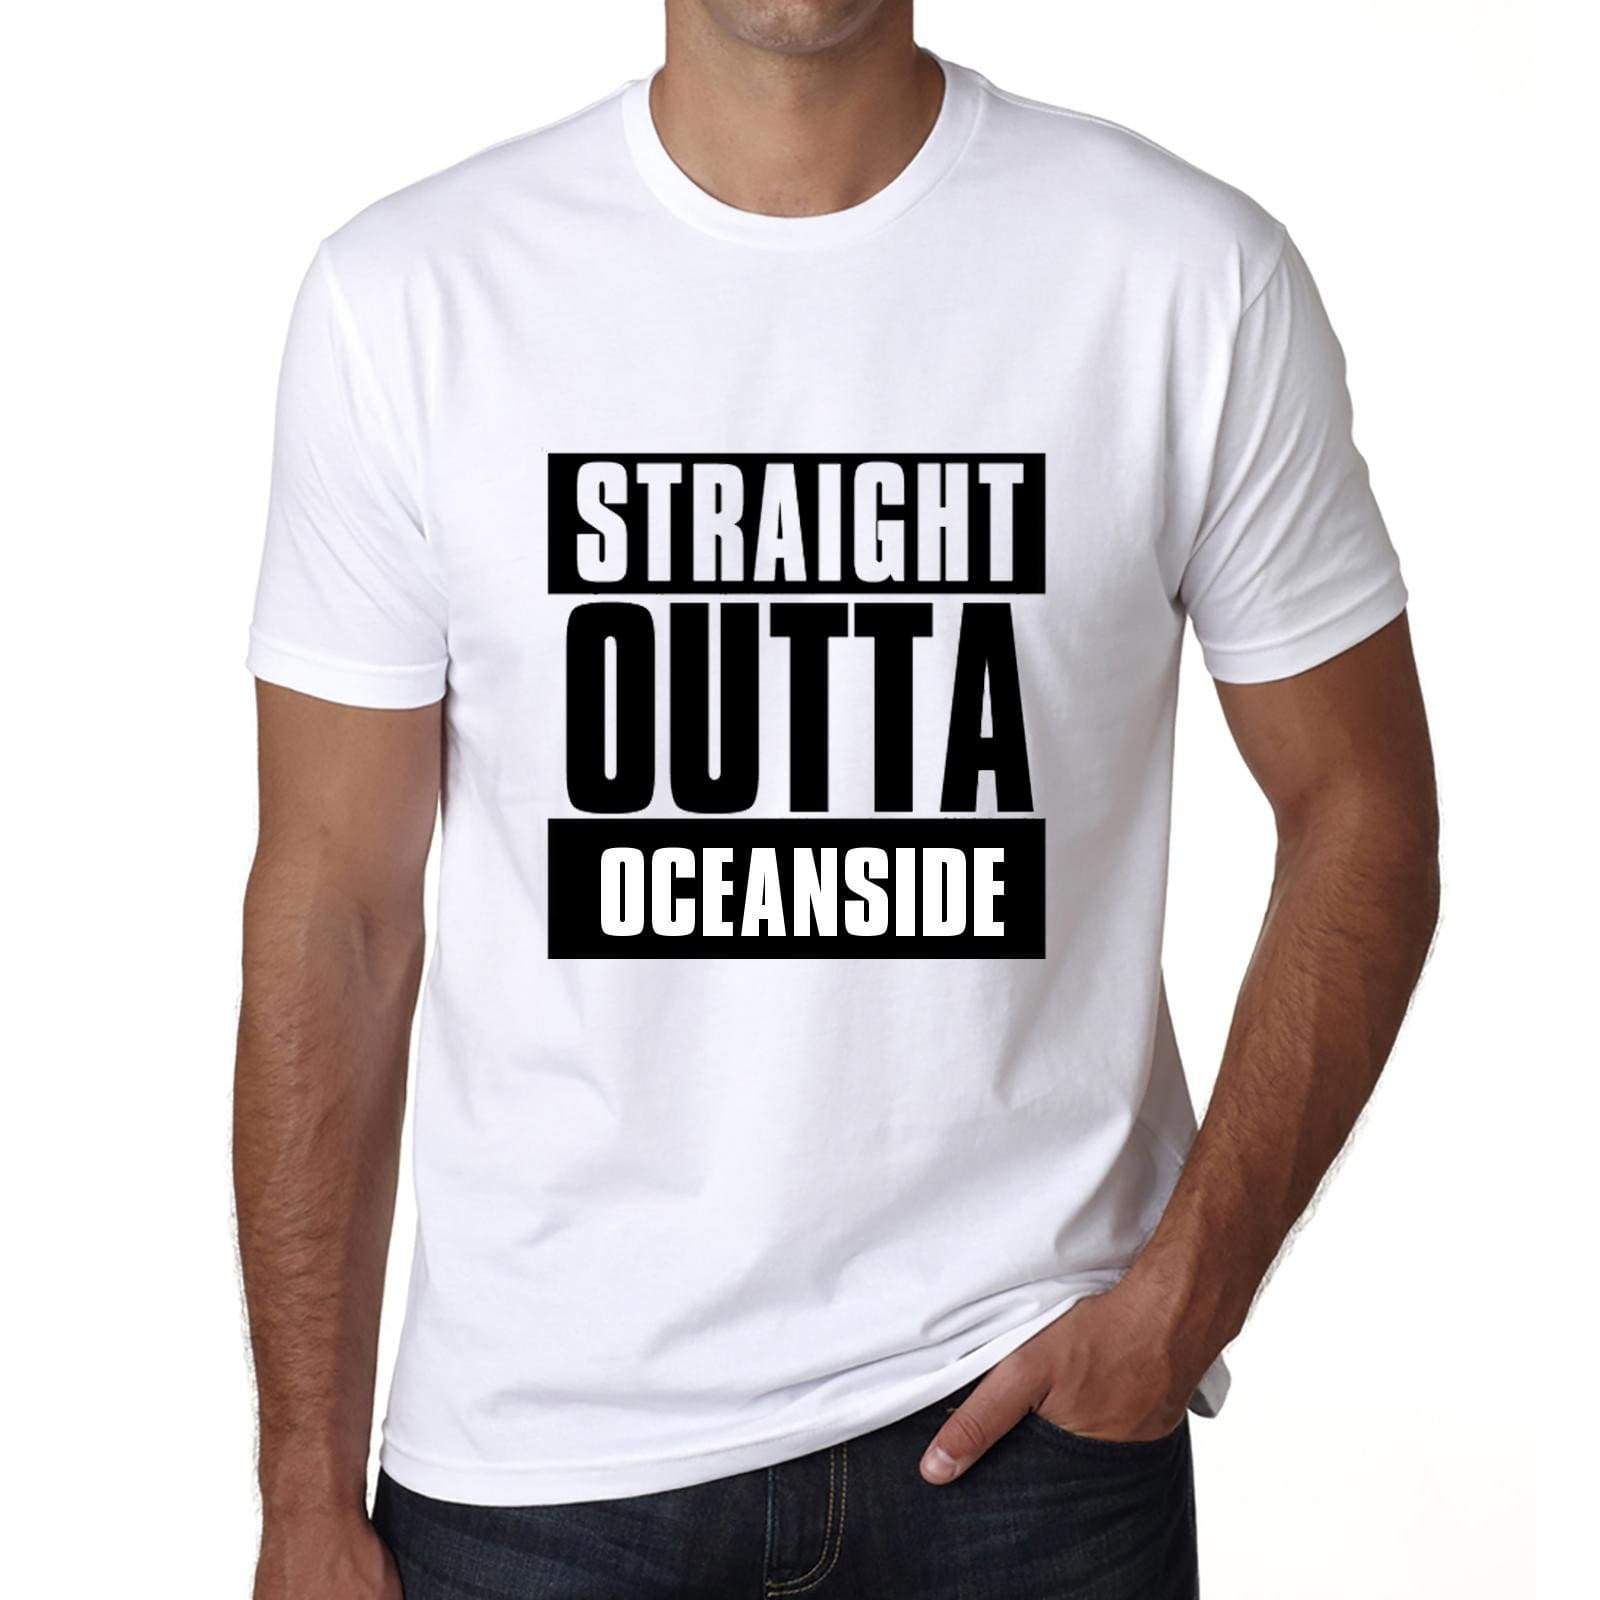 Straight Outta Oceanside Mens Short Sleeve Round Neck T-Shirt 00027 - White / S - Casual